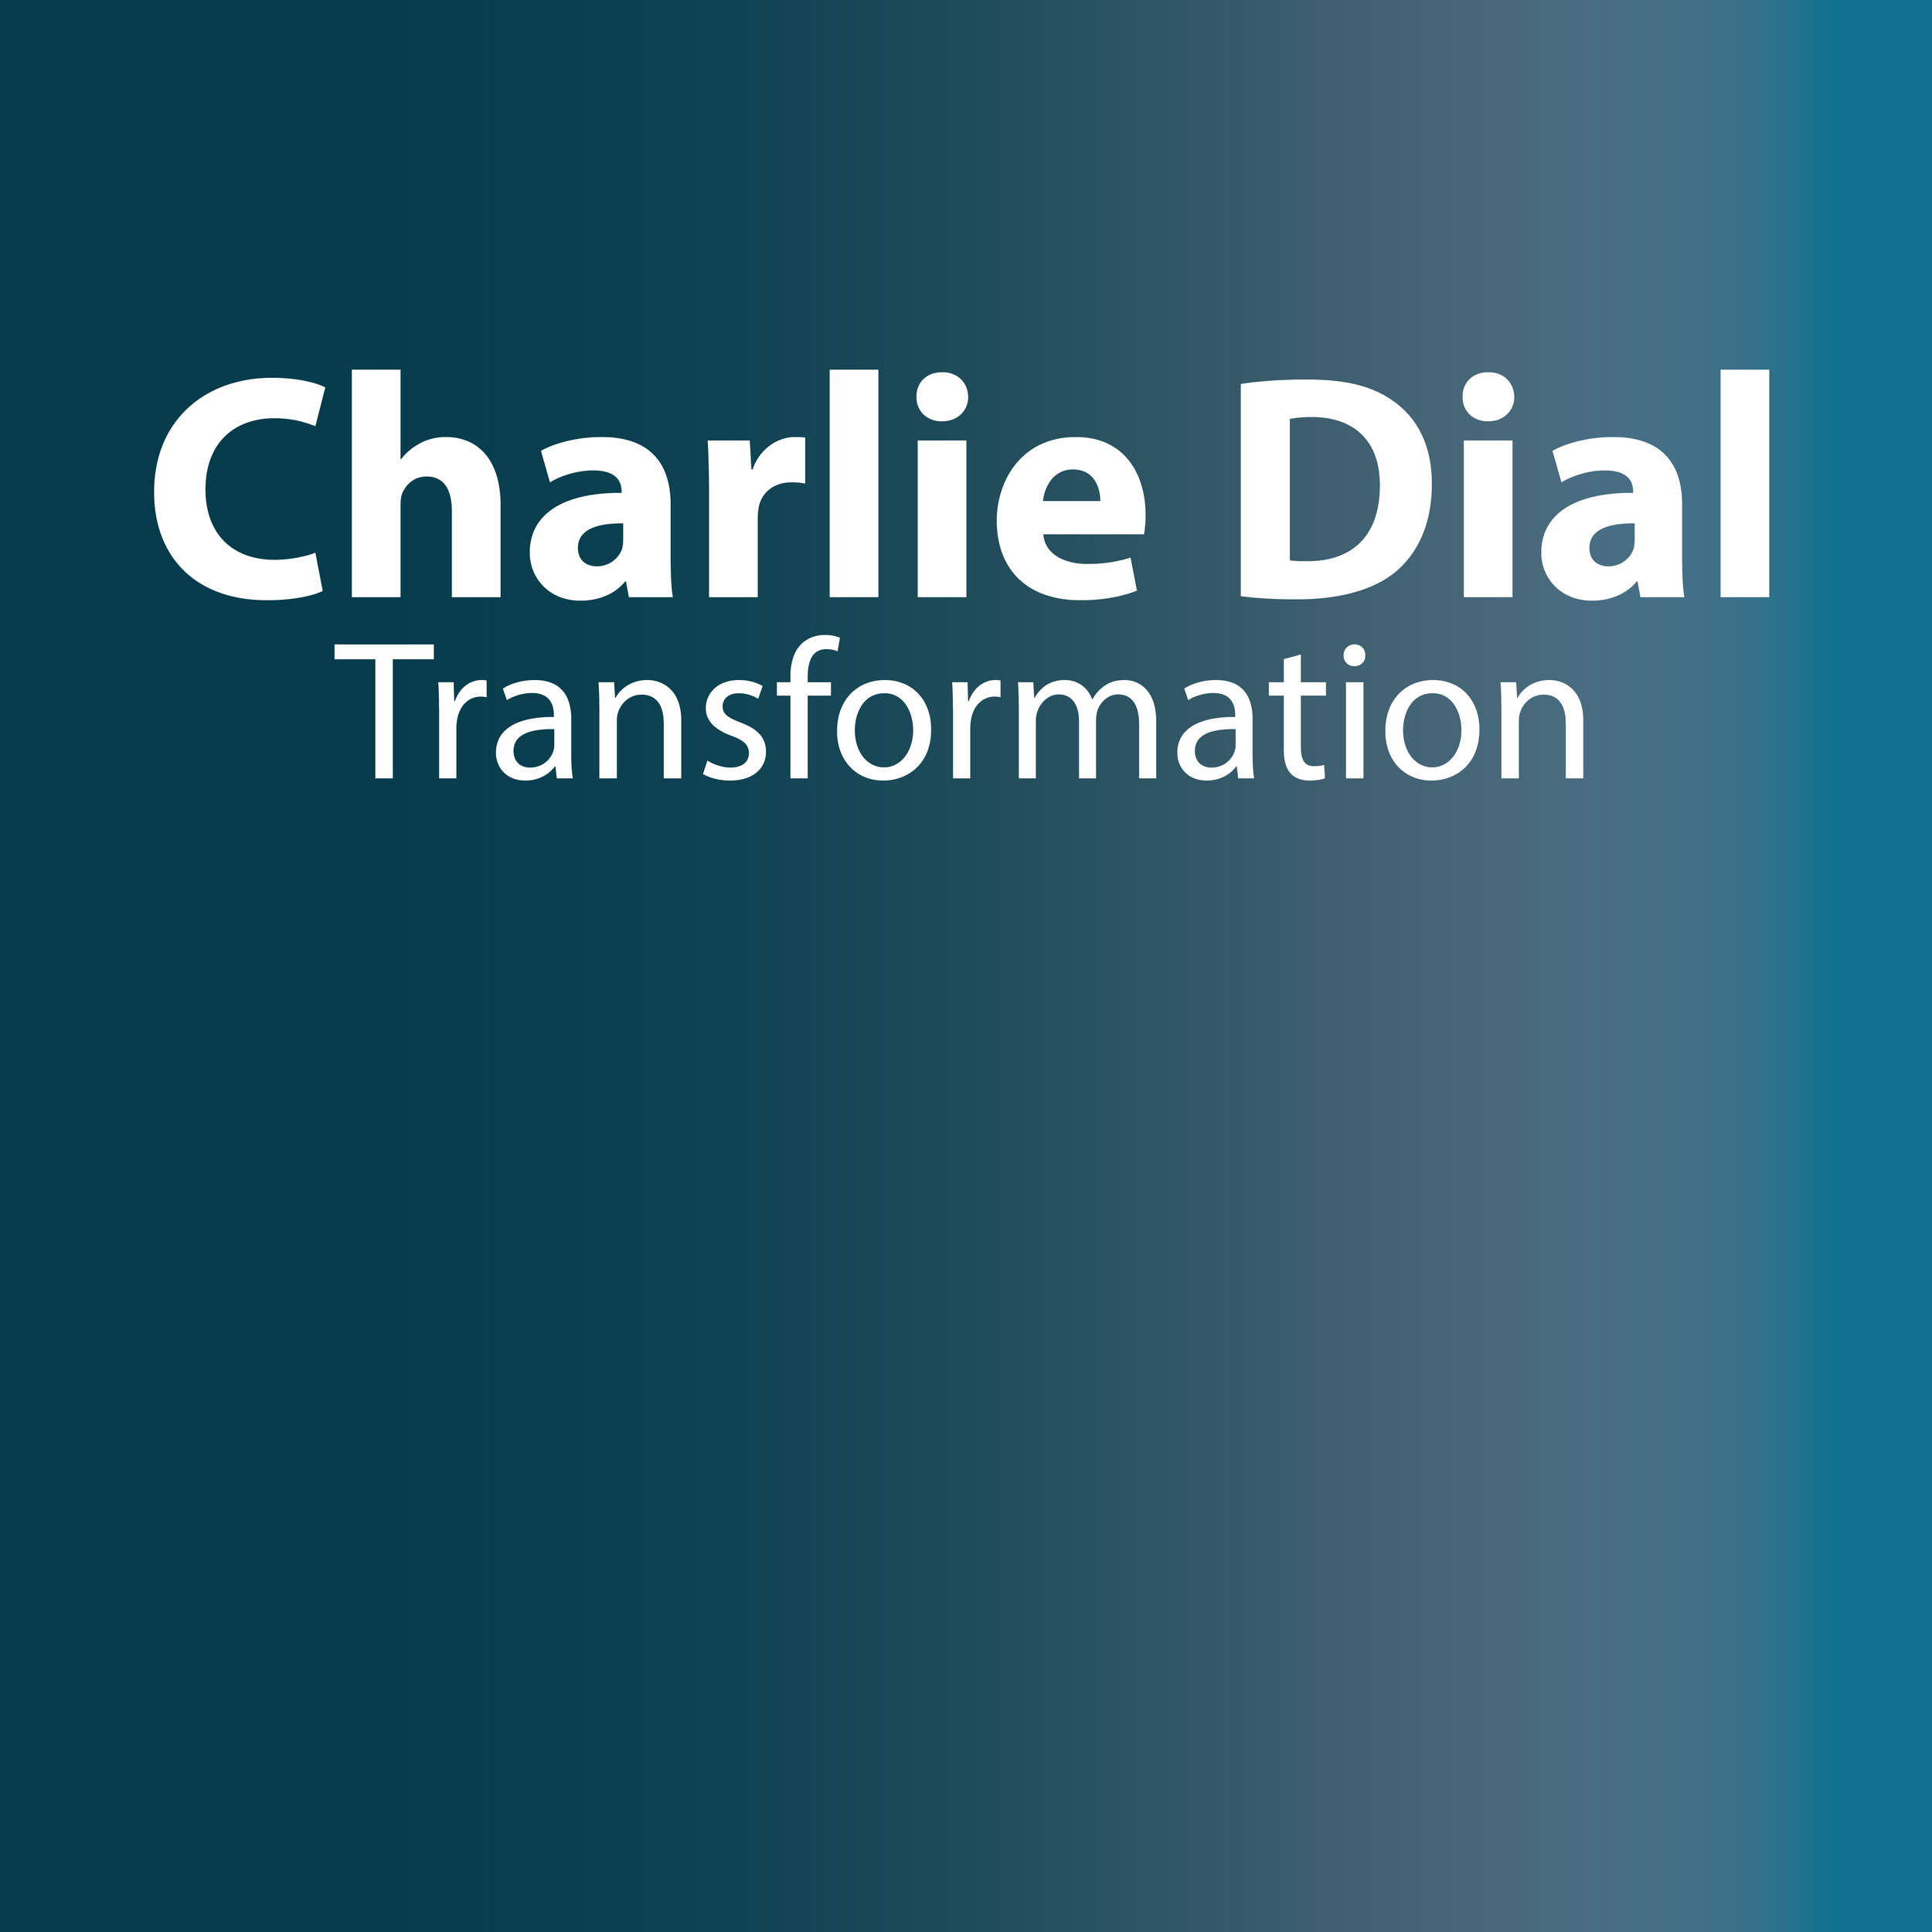 Charlie Dial